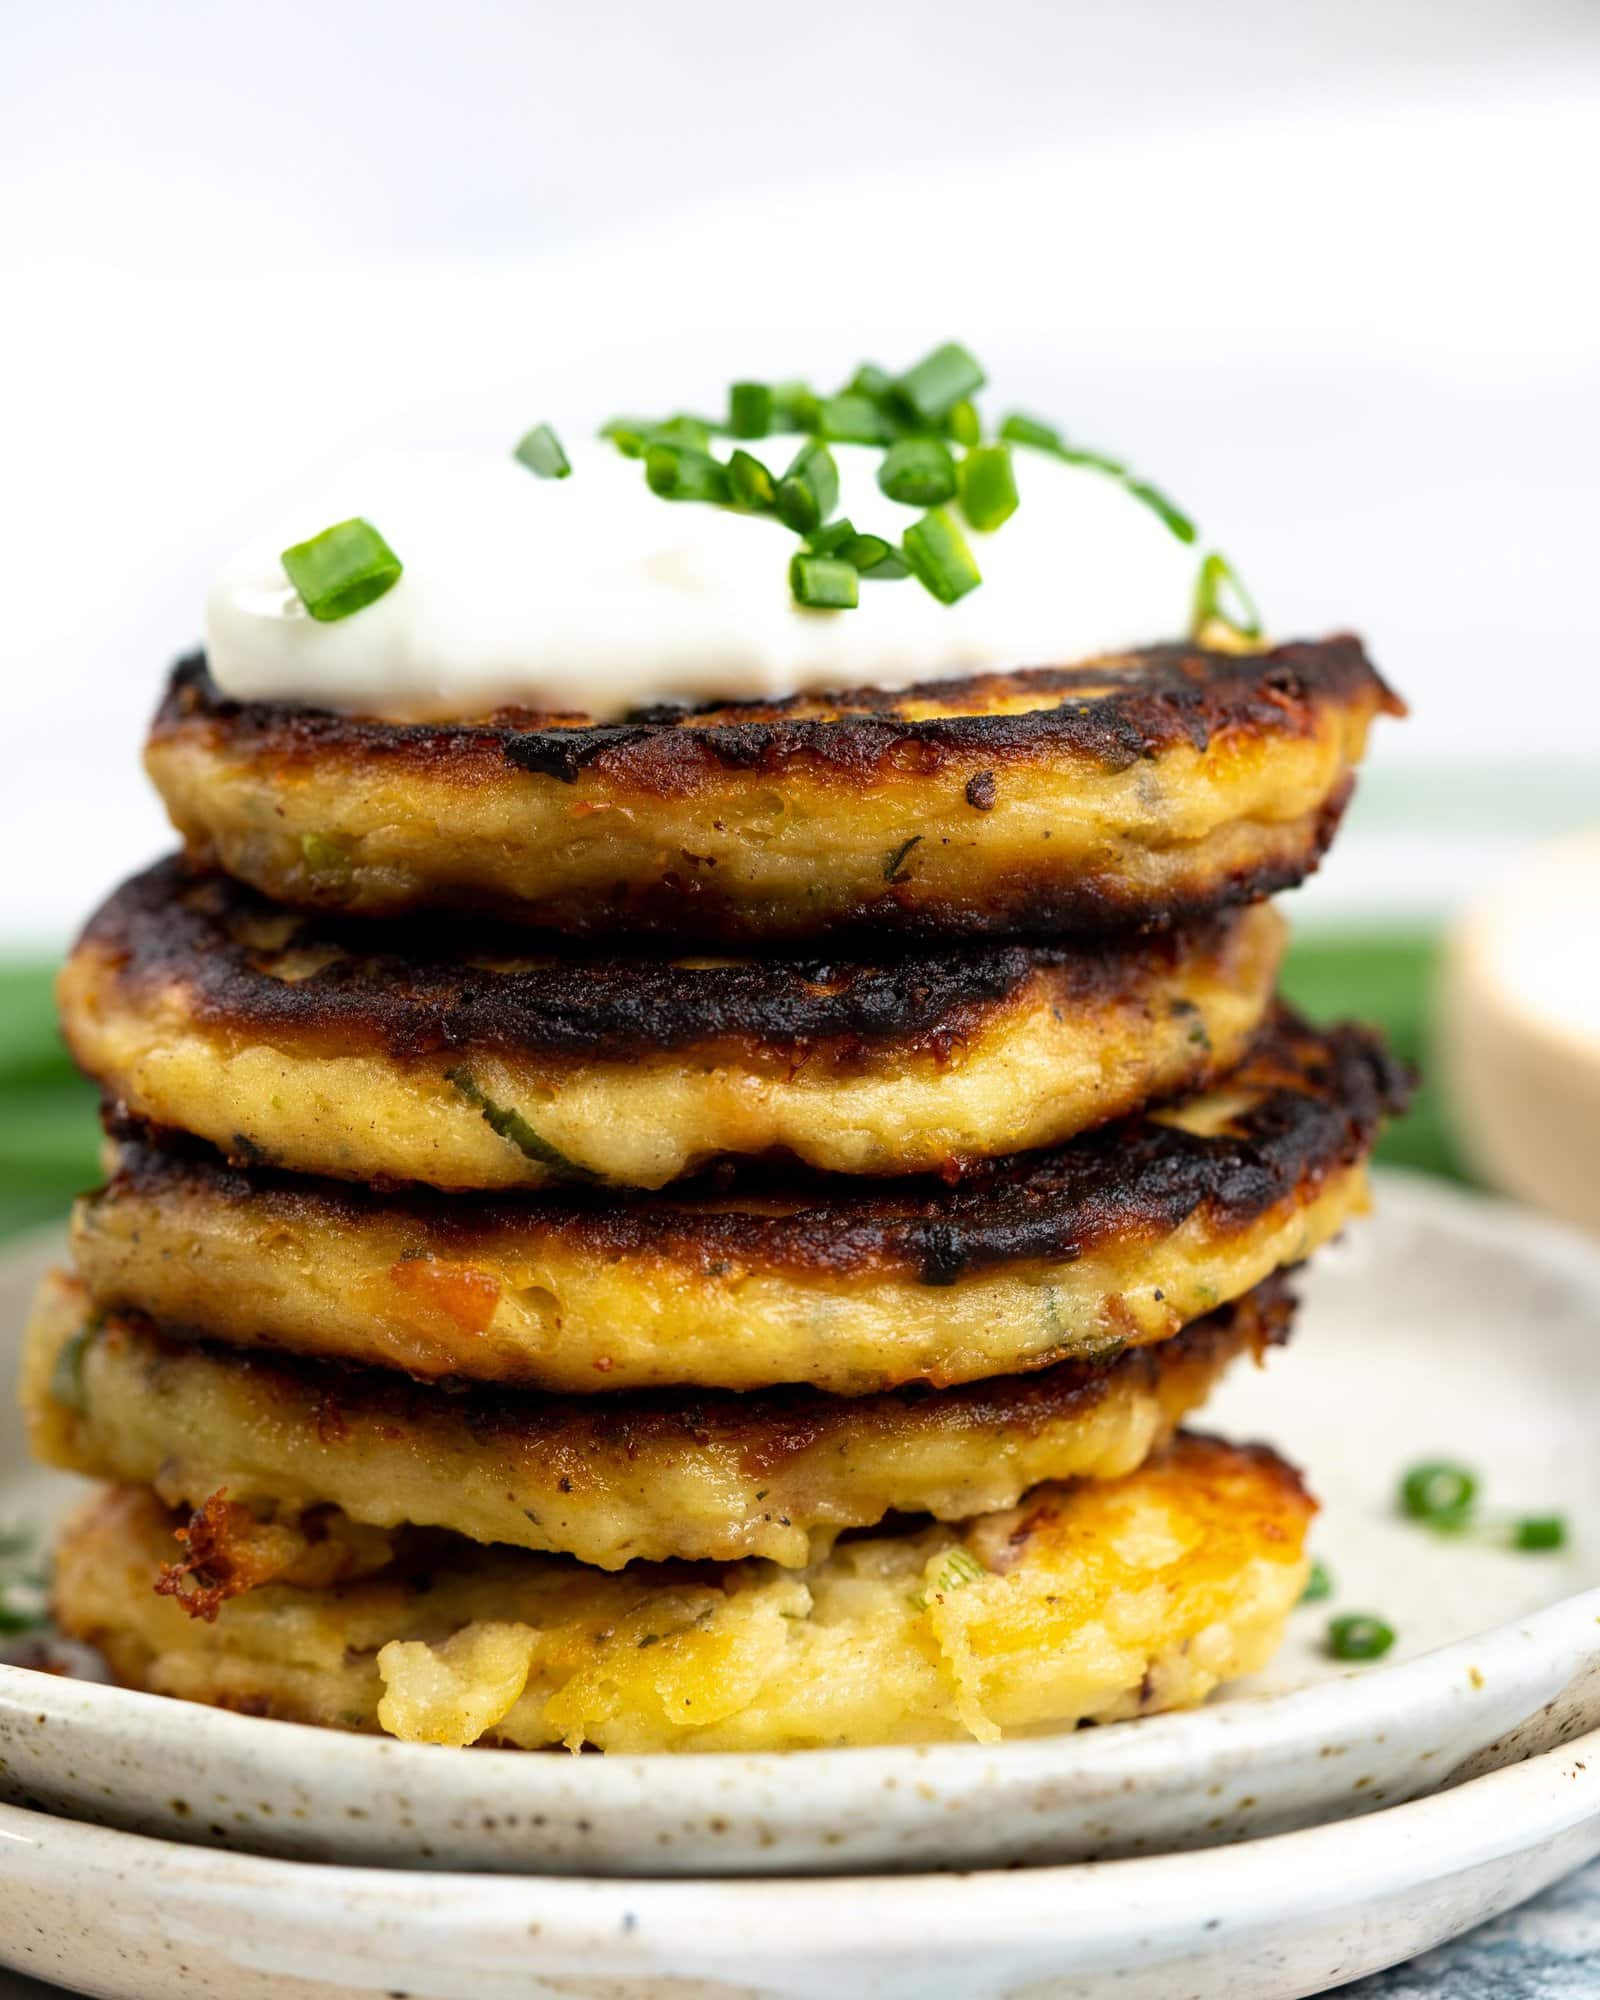 Stack of mashed potato pancakes served with a dollop of sour cream and sprinkled green onions on top.